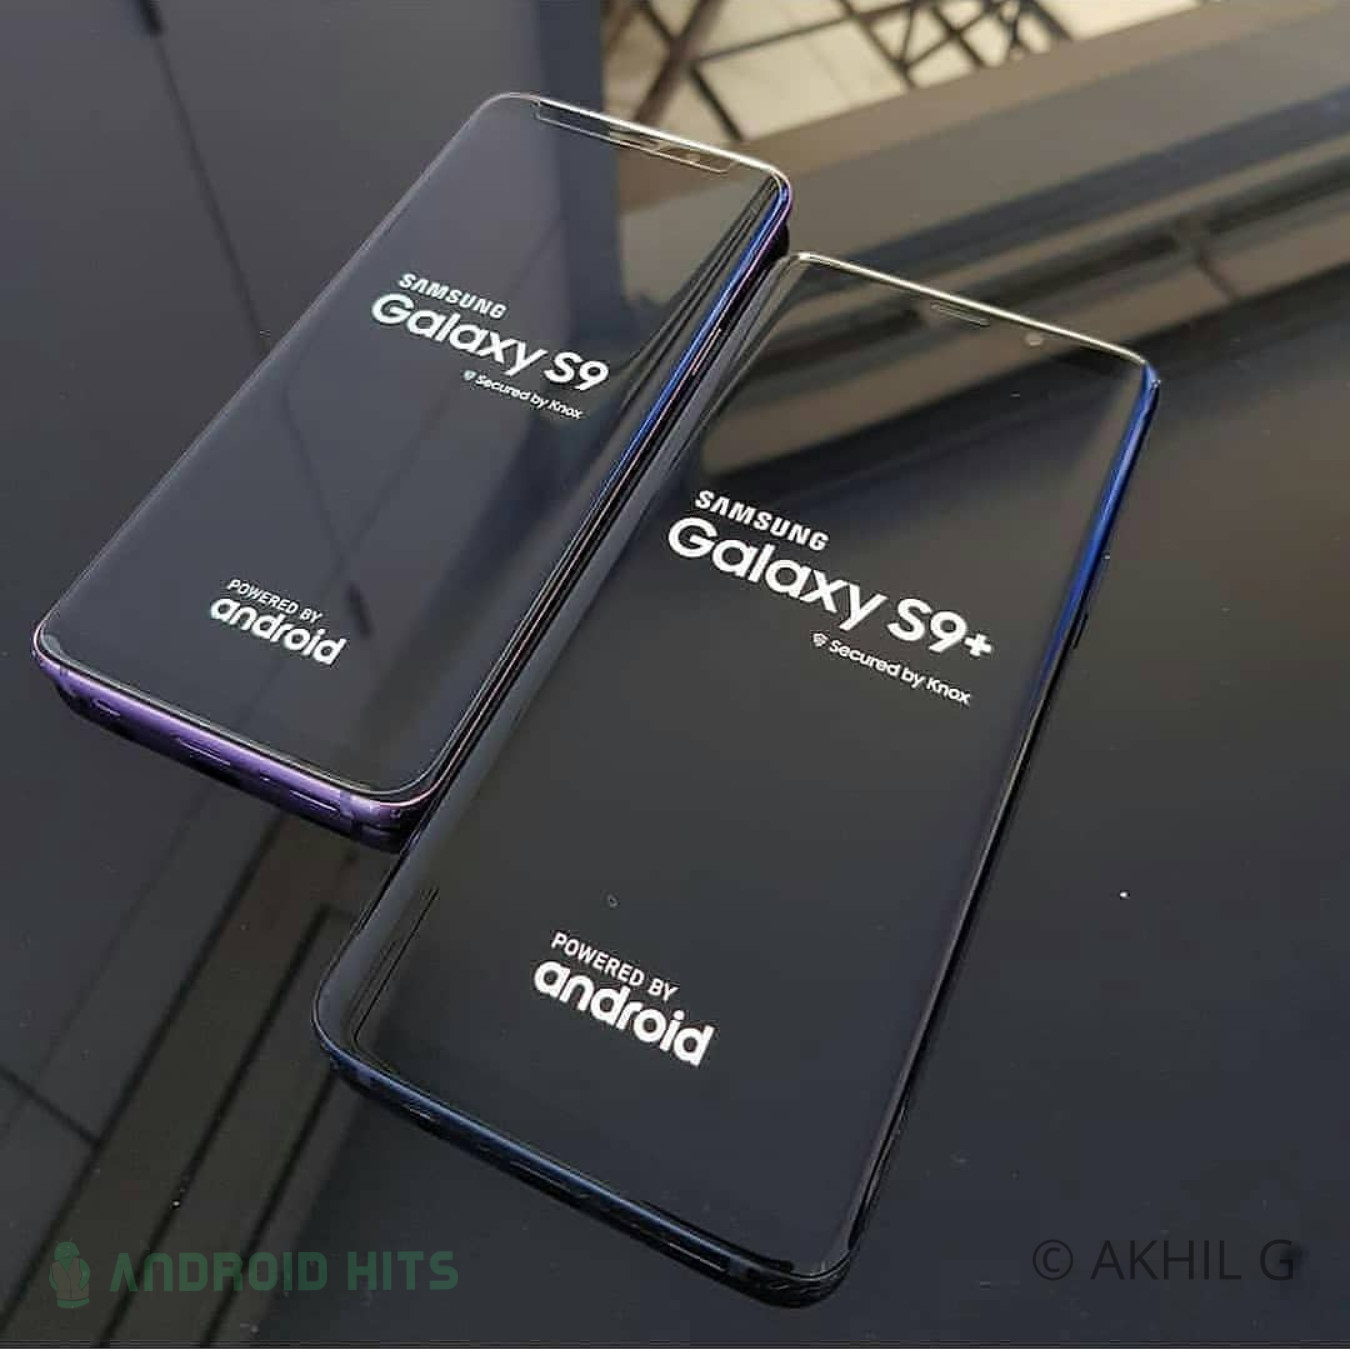 Microsoft Store sells non-Microsoft Edition Galaxy S9 devices with free wireless charger 1